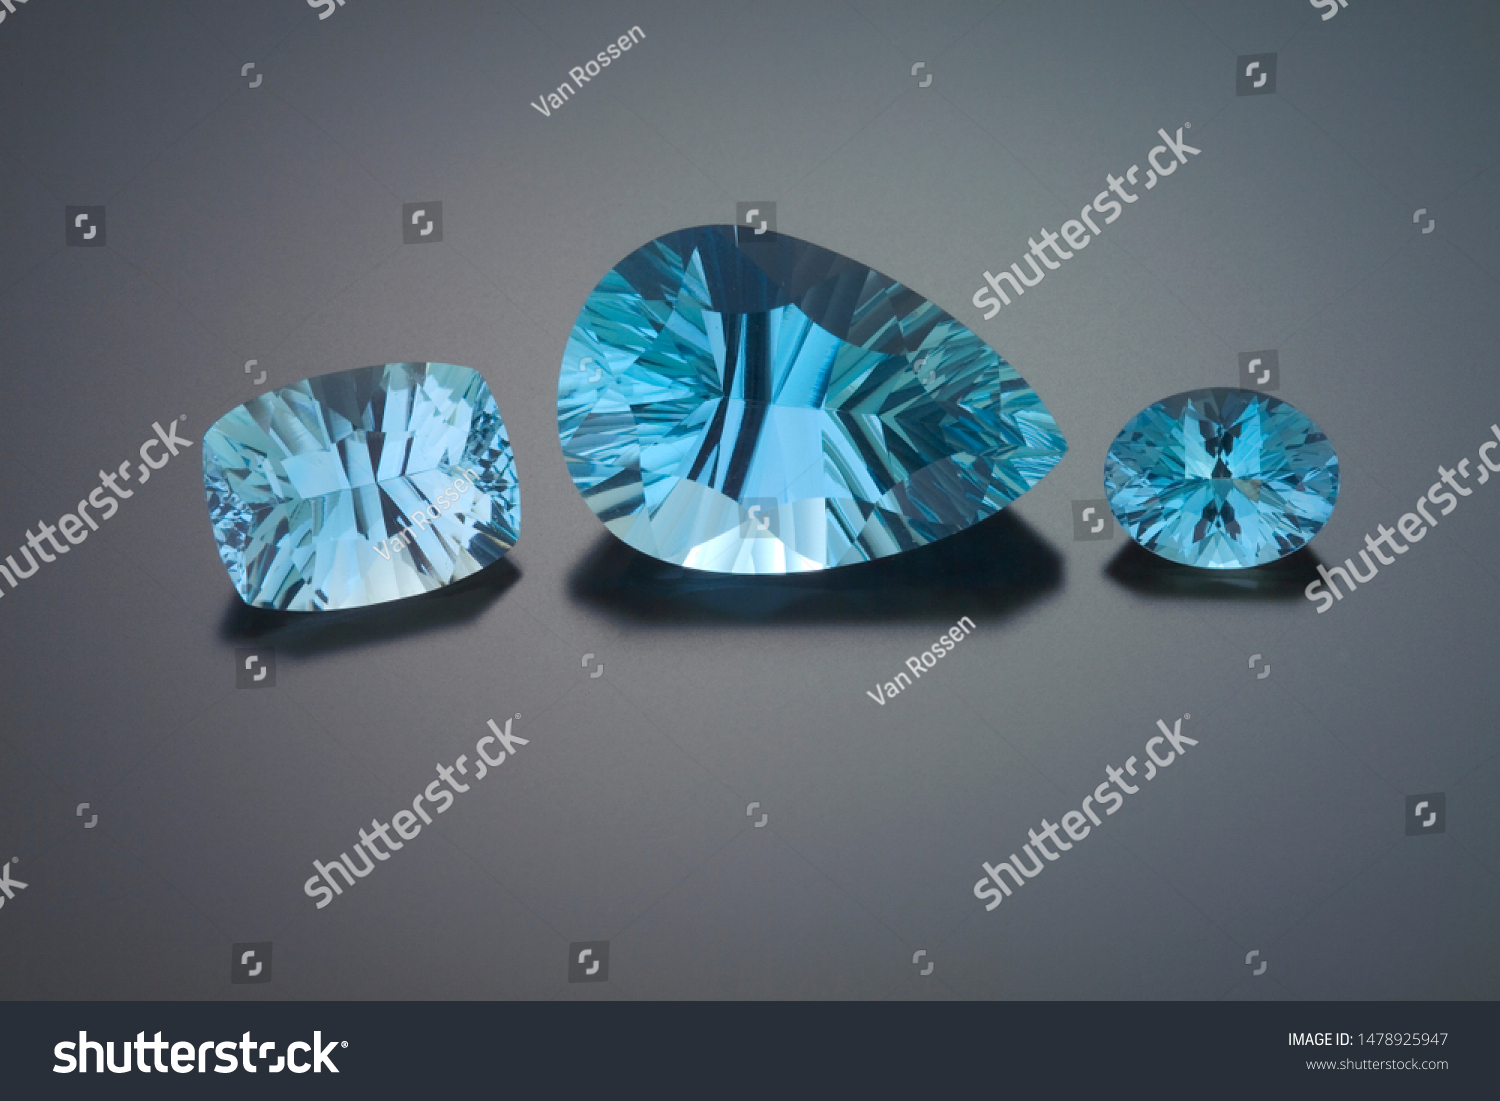 A pincushion rectangles, a large pear and an oval shape faceted aquamarine are shown on a grey reflective background. #1478925947